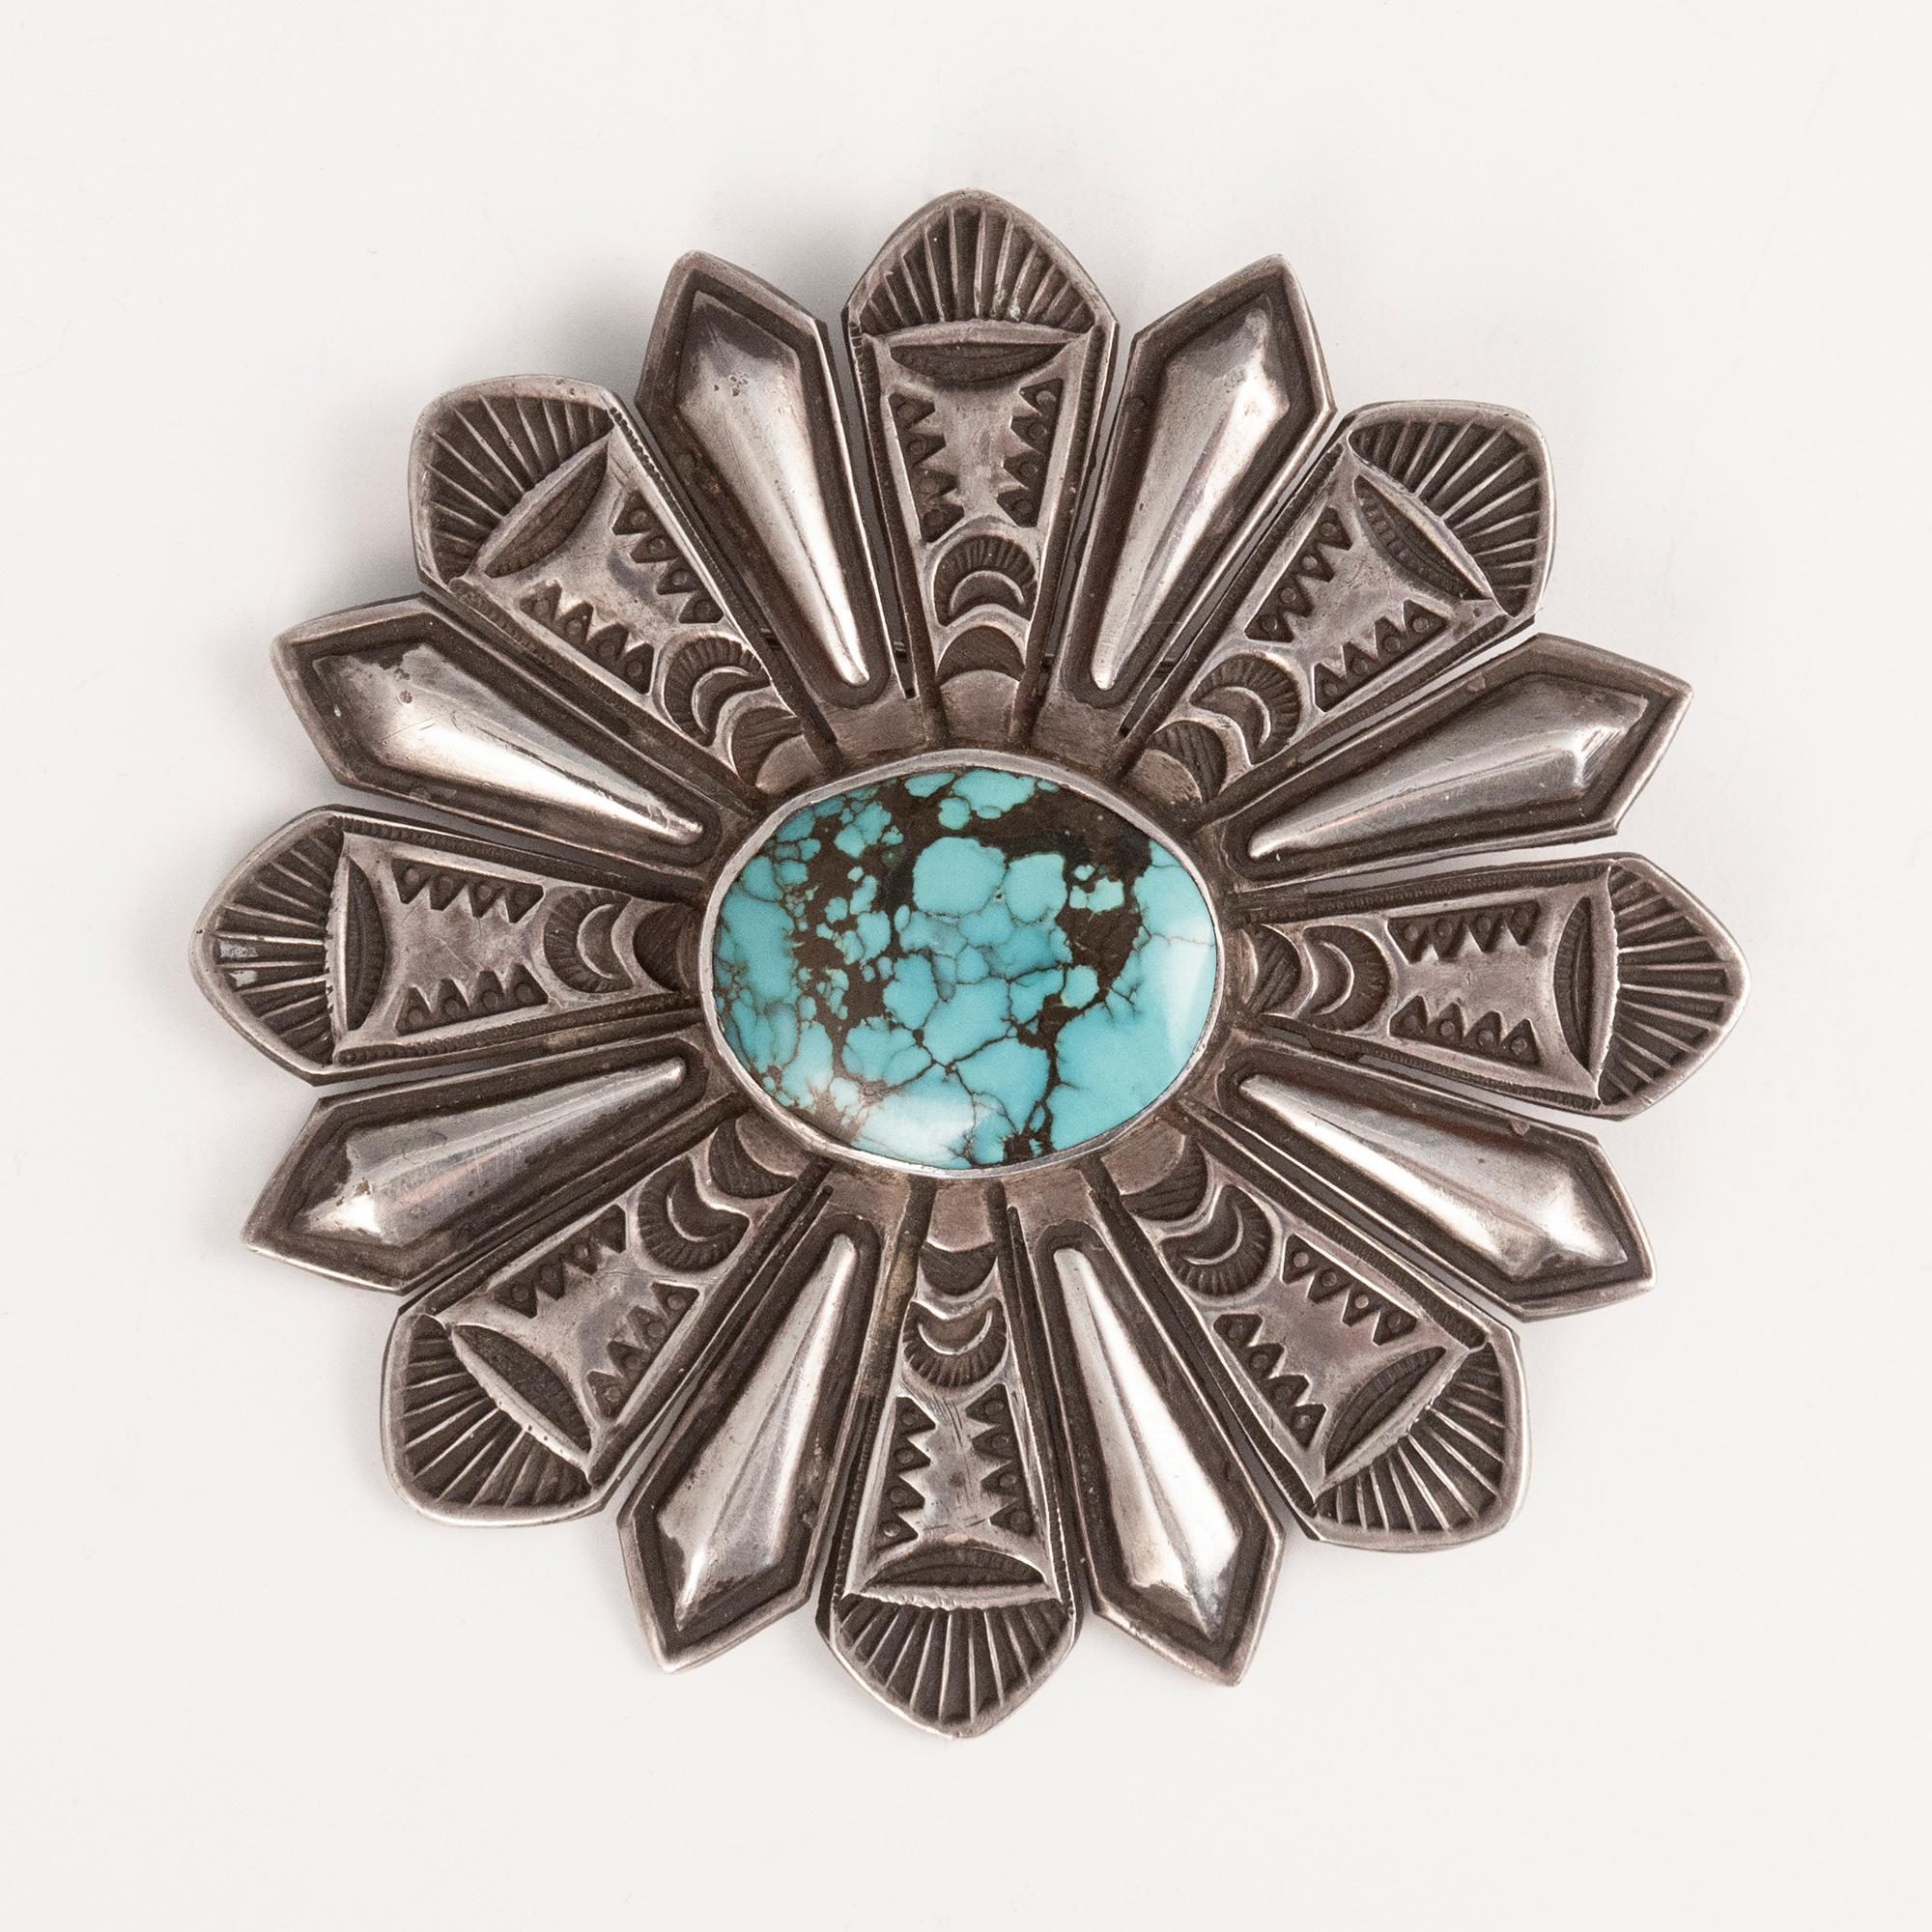 20th century Navajo Silversmith Harry Begay Turquoise and Silver Brooch

A beautiful bezel-set turquoise stone is at the center of this finely stamped sunburst brooch by Navajo silversmith Harry H. Begay. Marked with initials HHB over a left